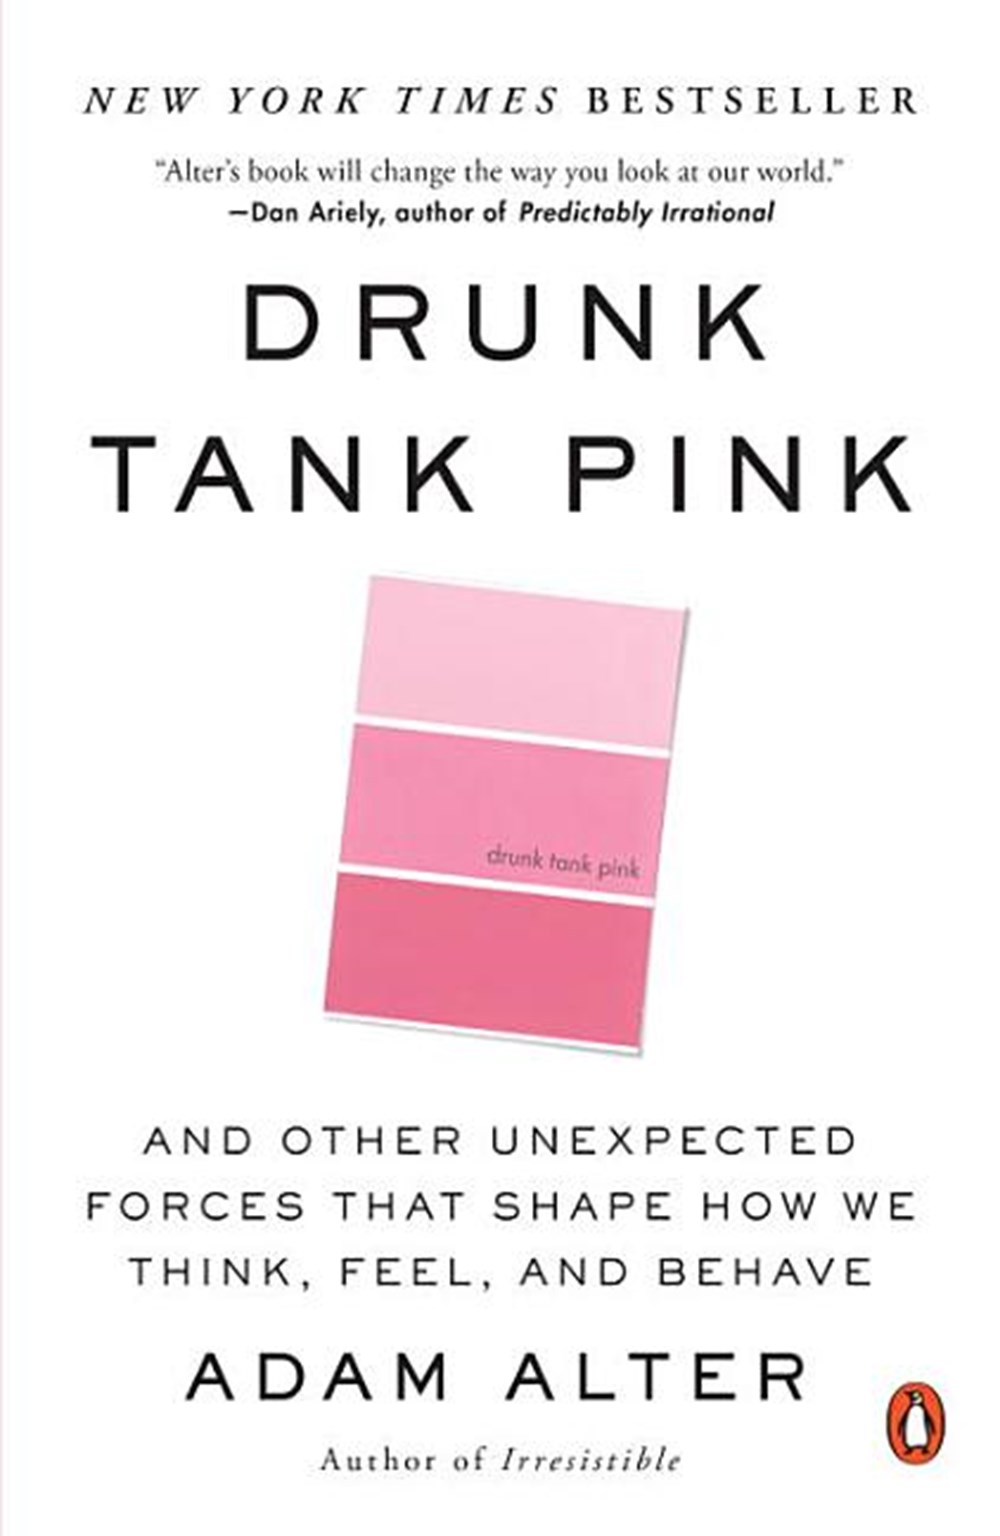 Drunk Tank Pink And Other Unexpected Forces That Shape How We Think, Feel, and Behave